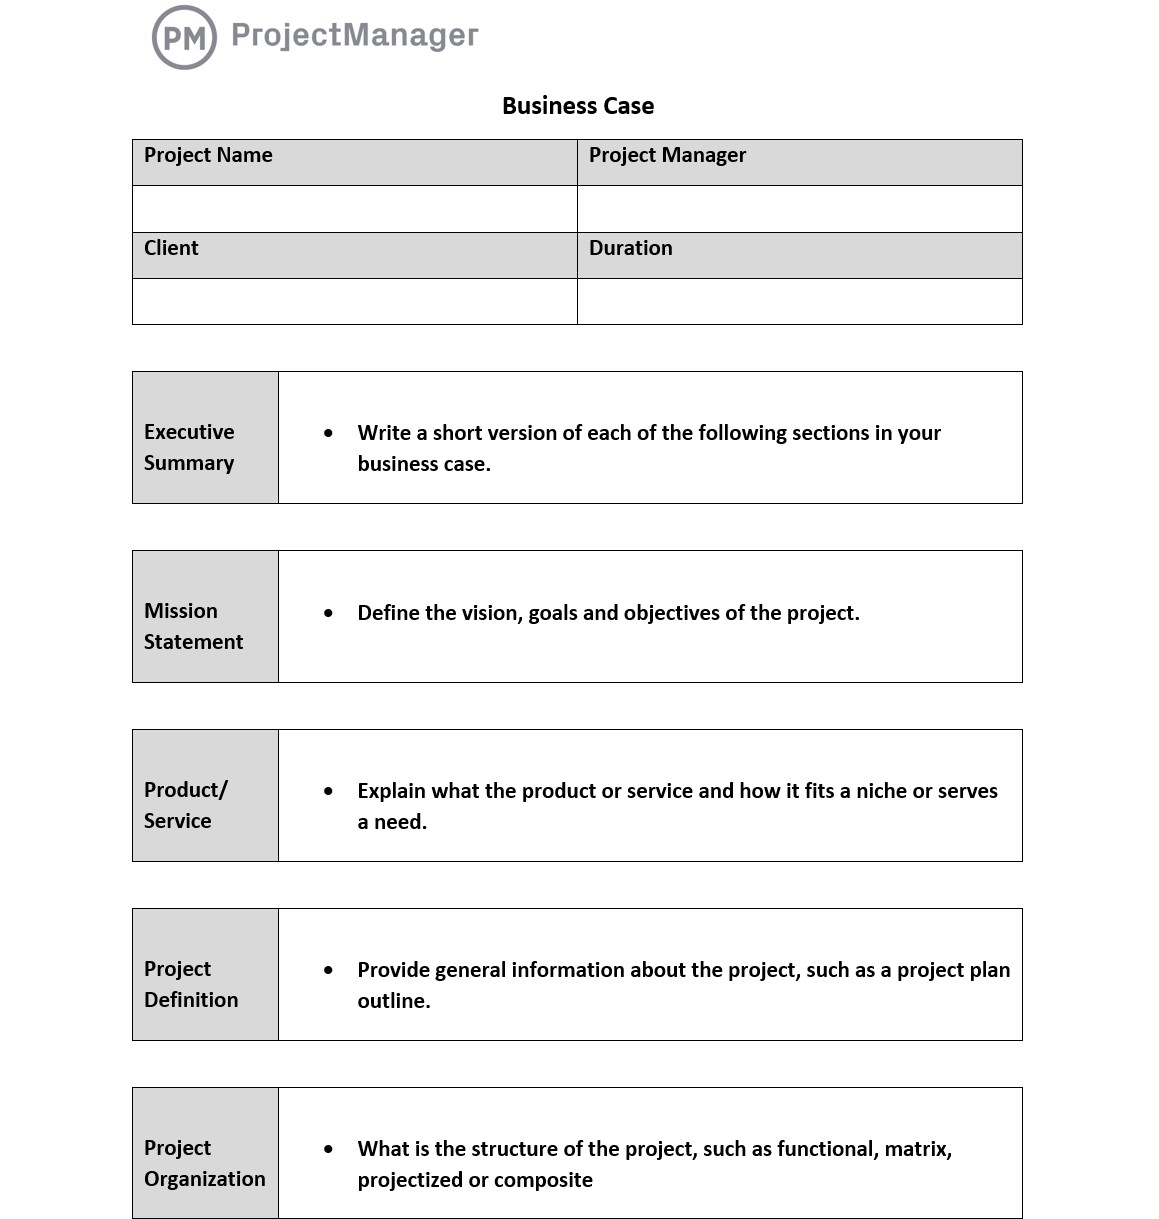 Business case template in ProjectManager